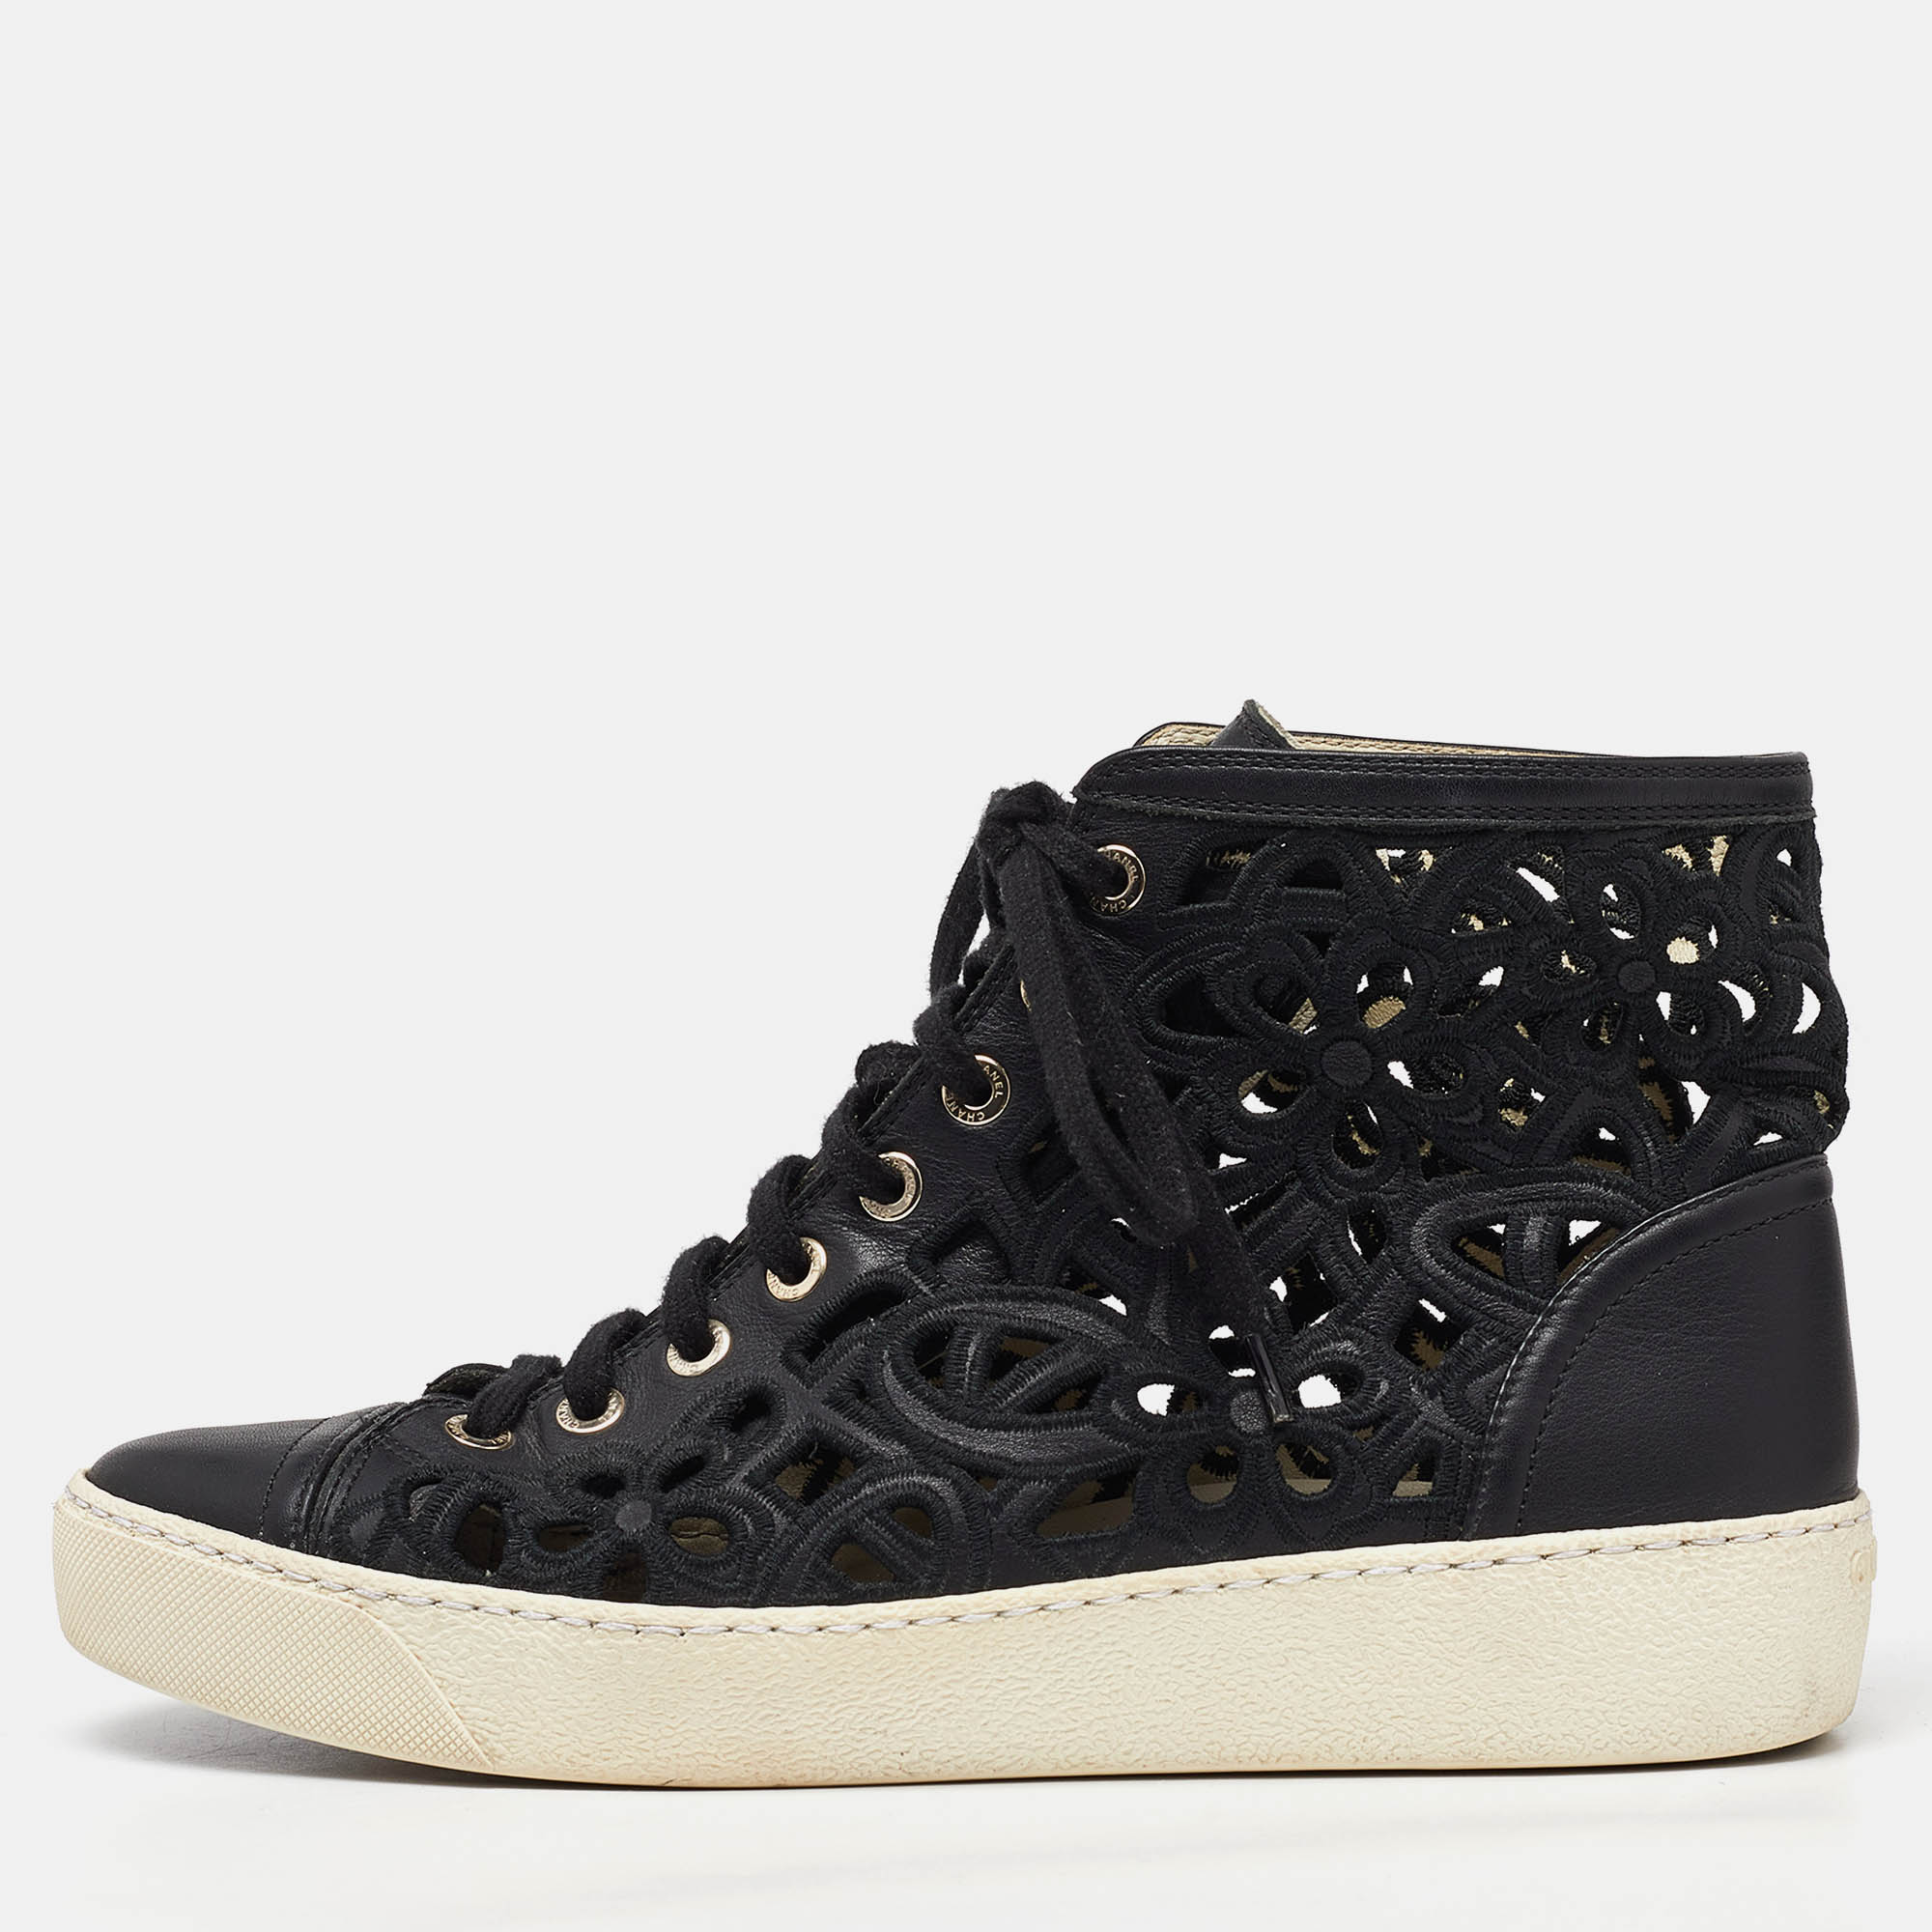 

Chanel Black Leather and Lace Cut Out High Top Sneakers Size